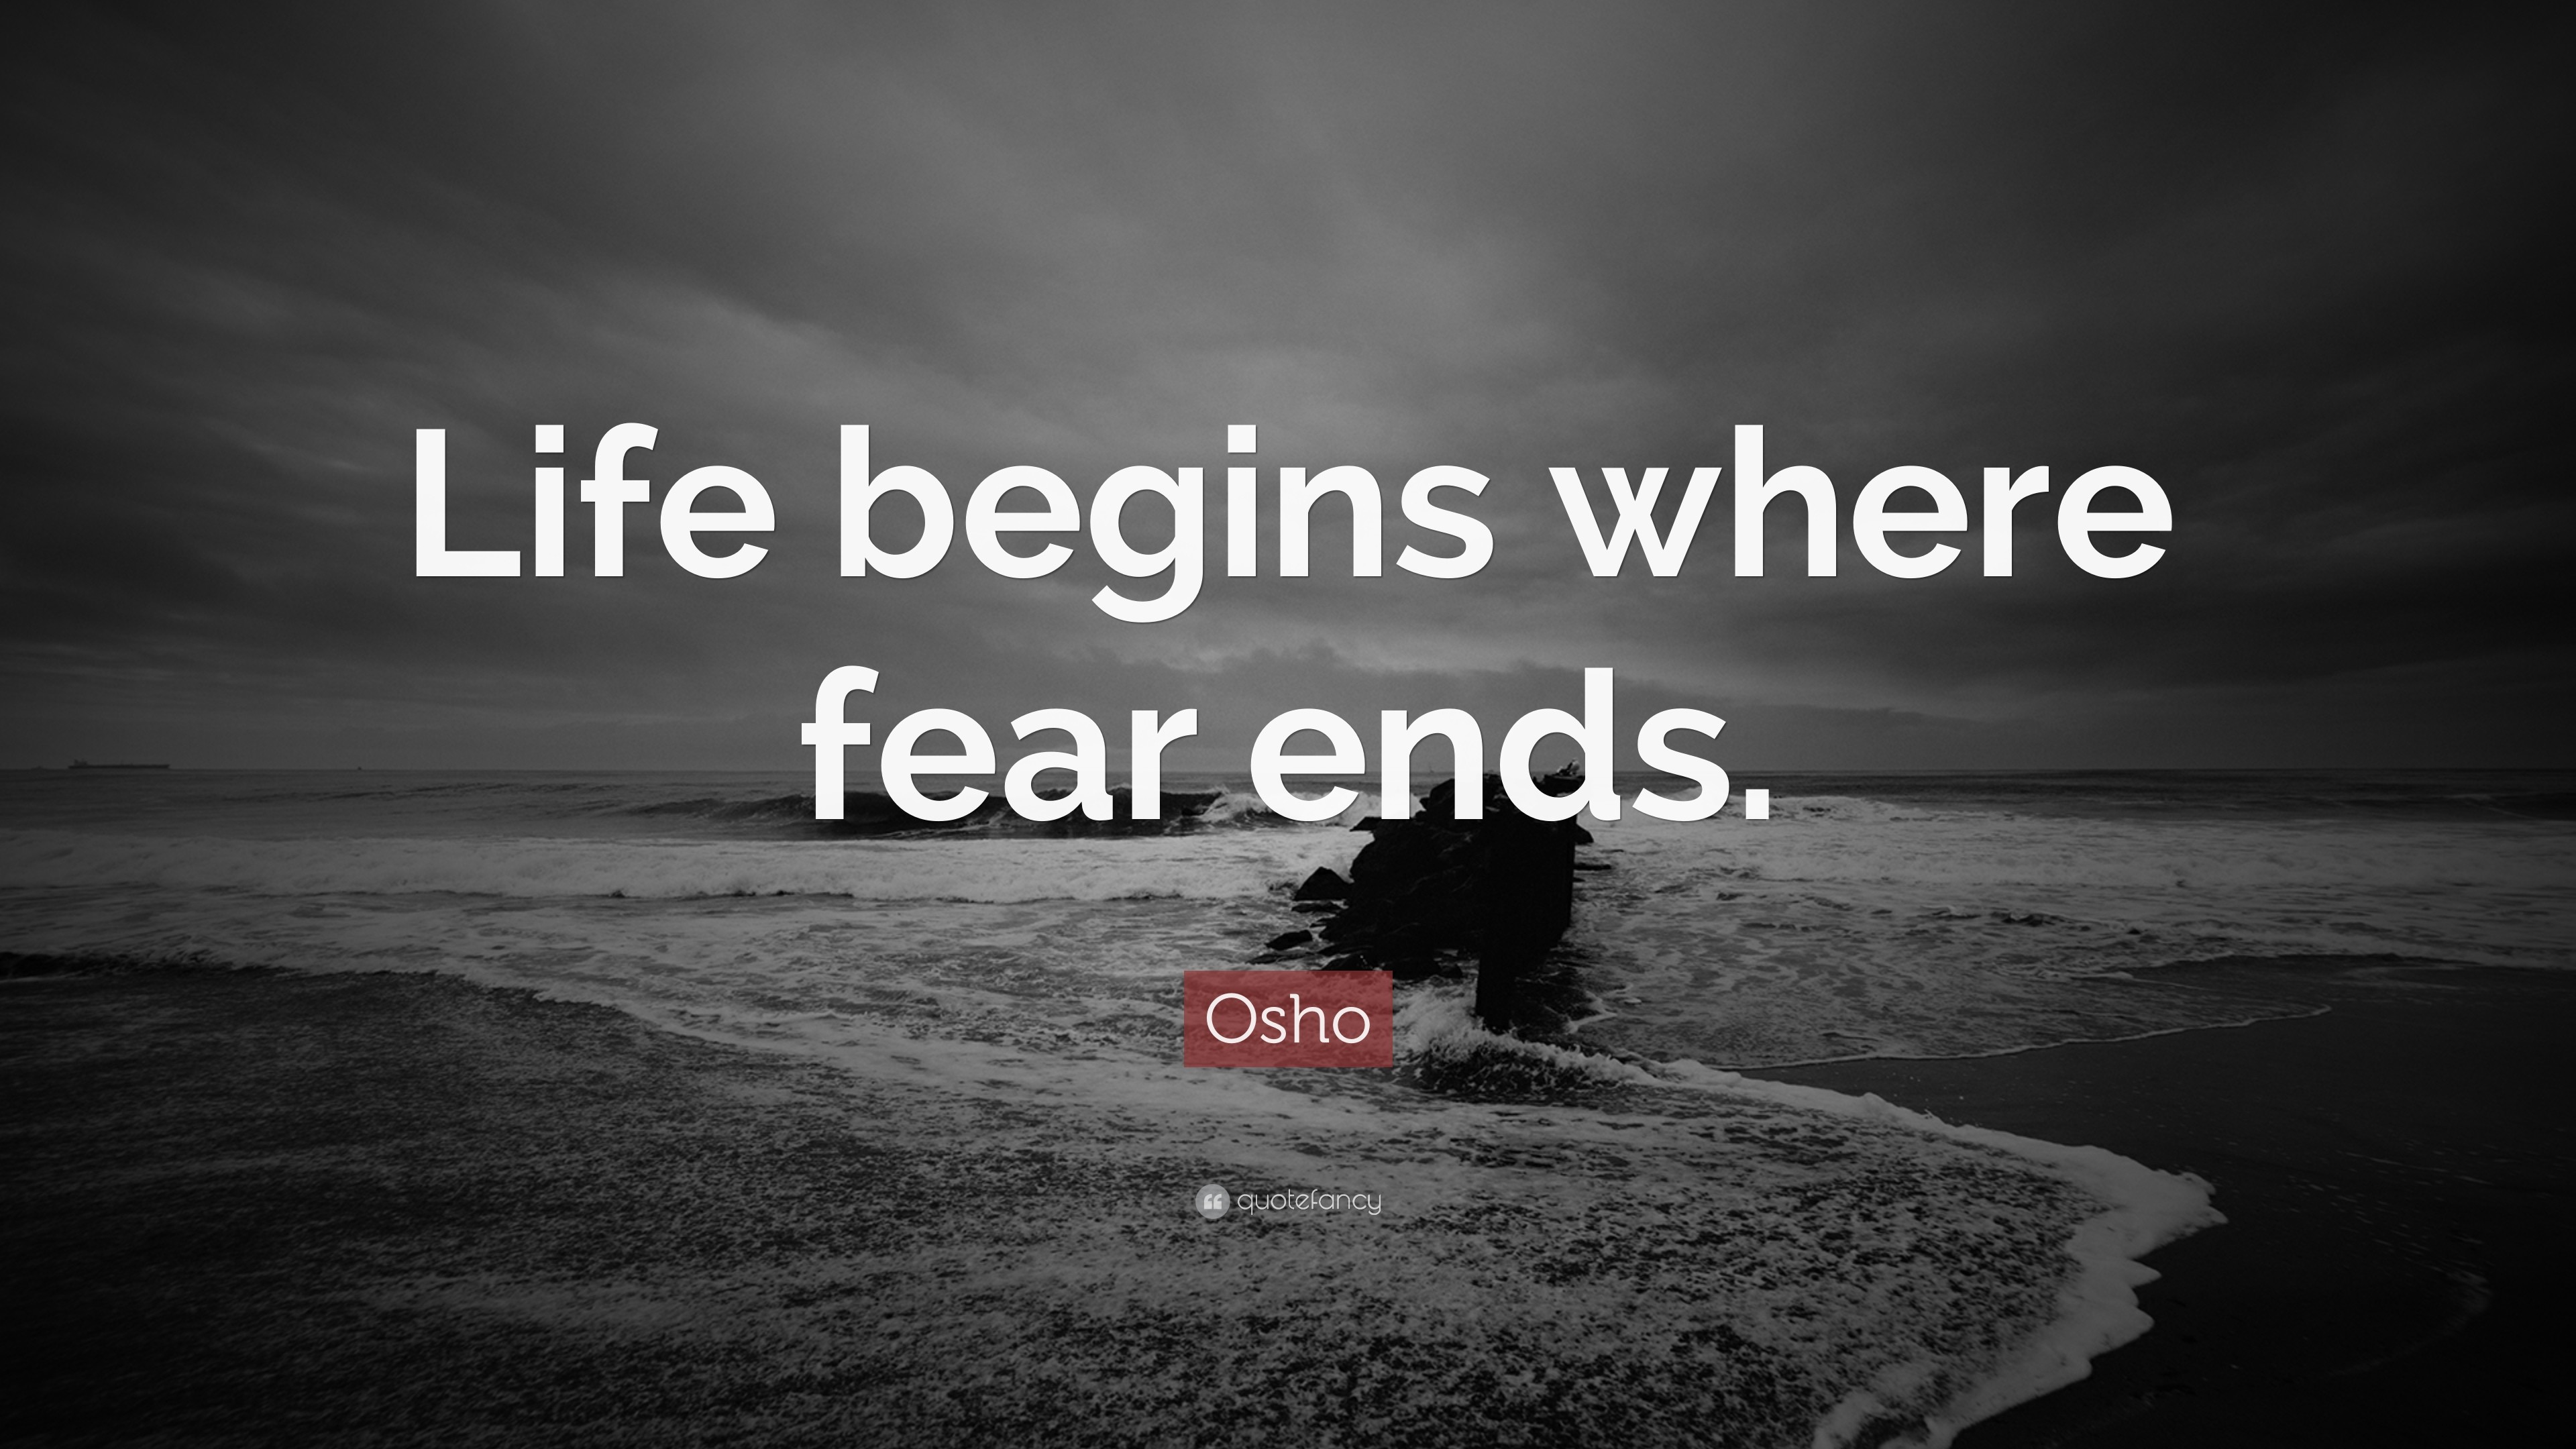 3840x2160 Osho Quote: “Life begins where fear ends.”